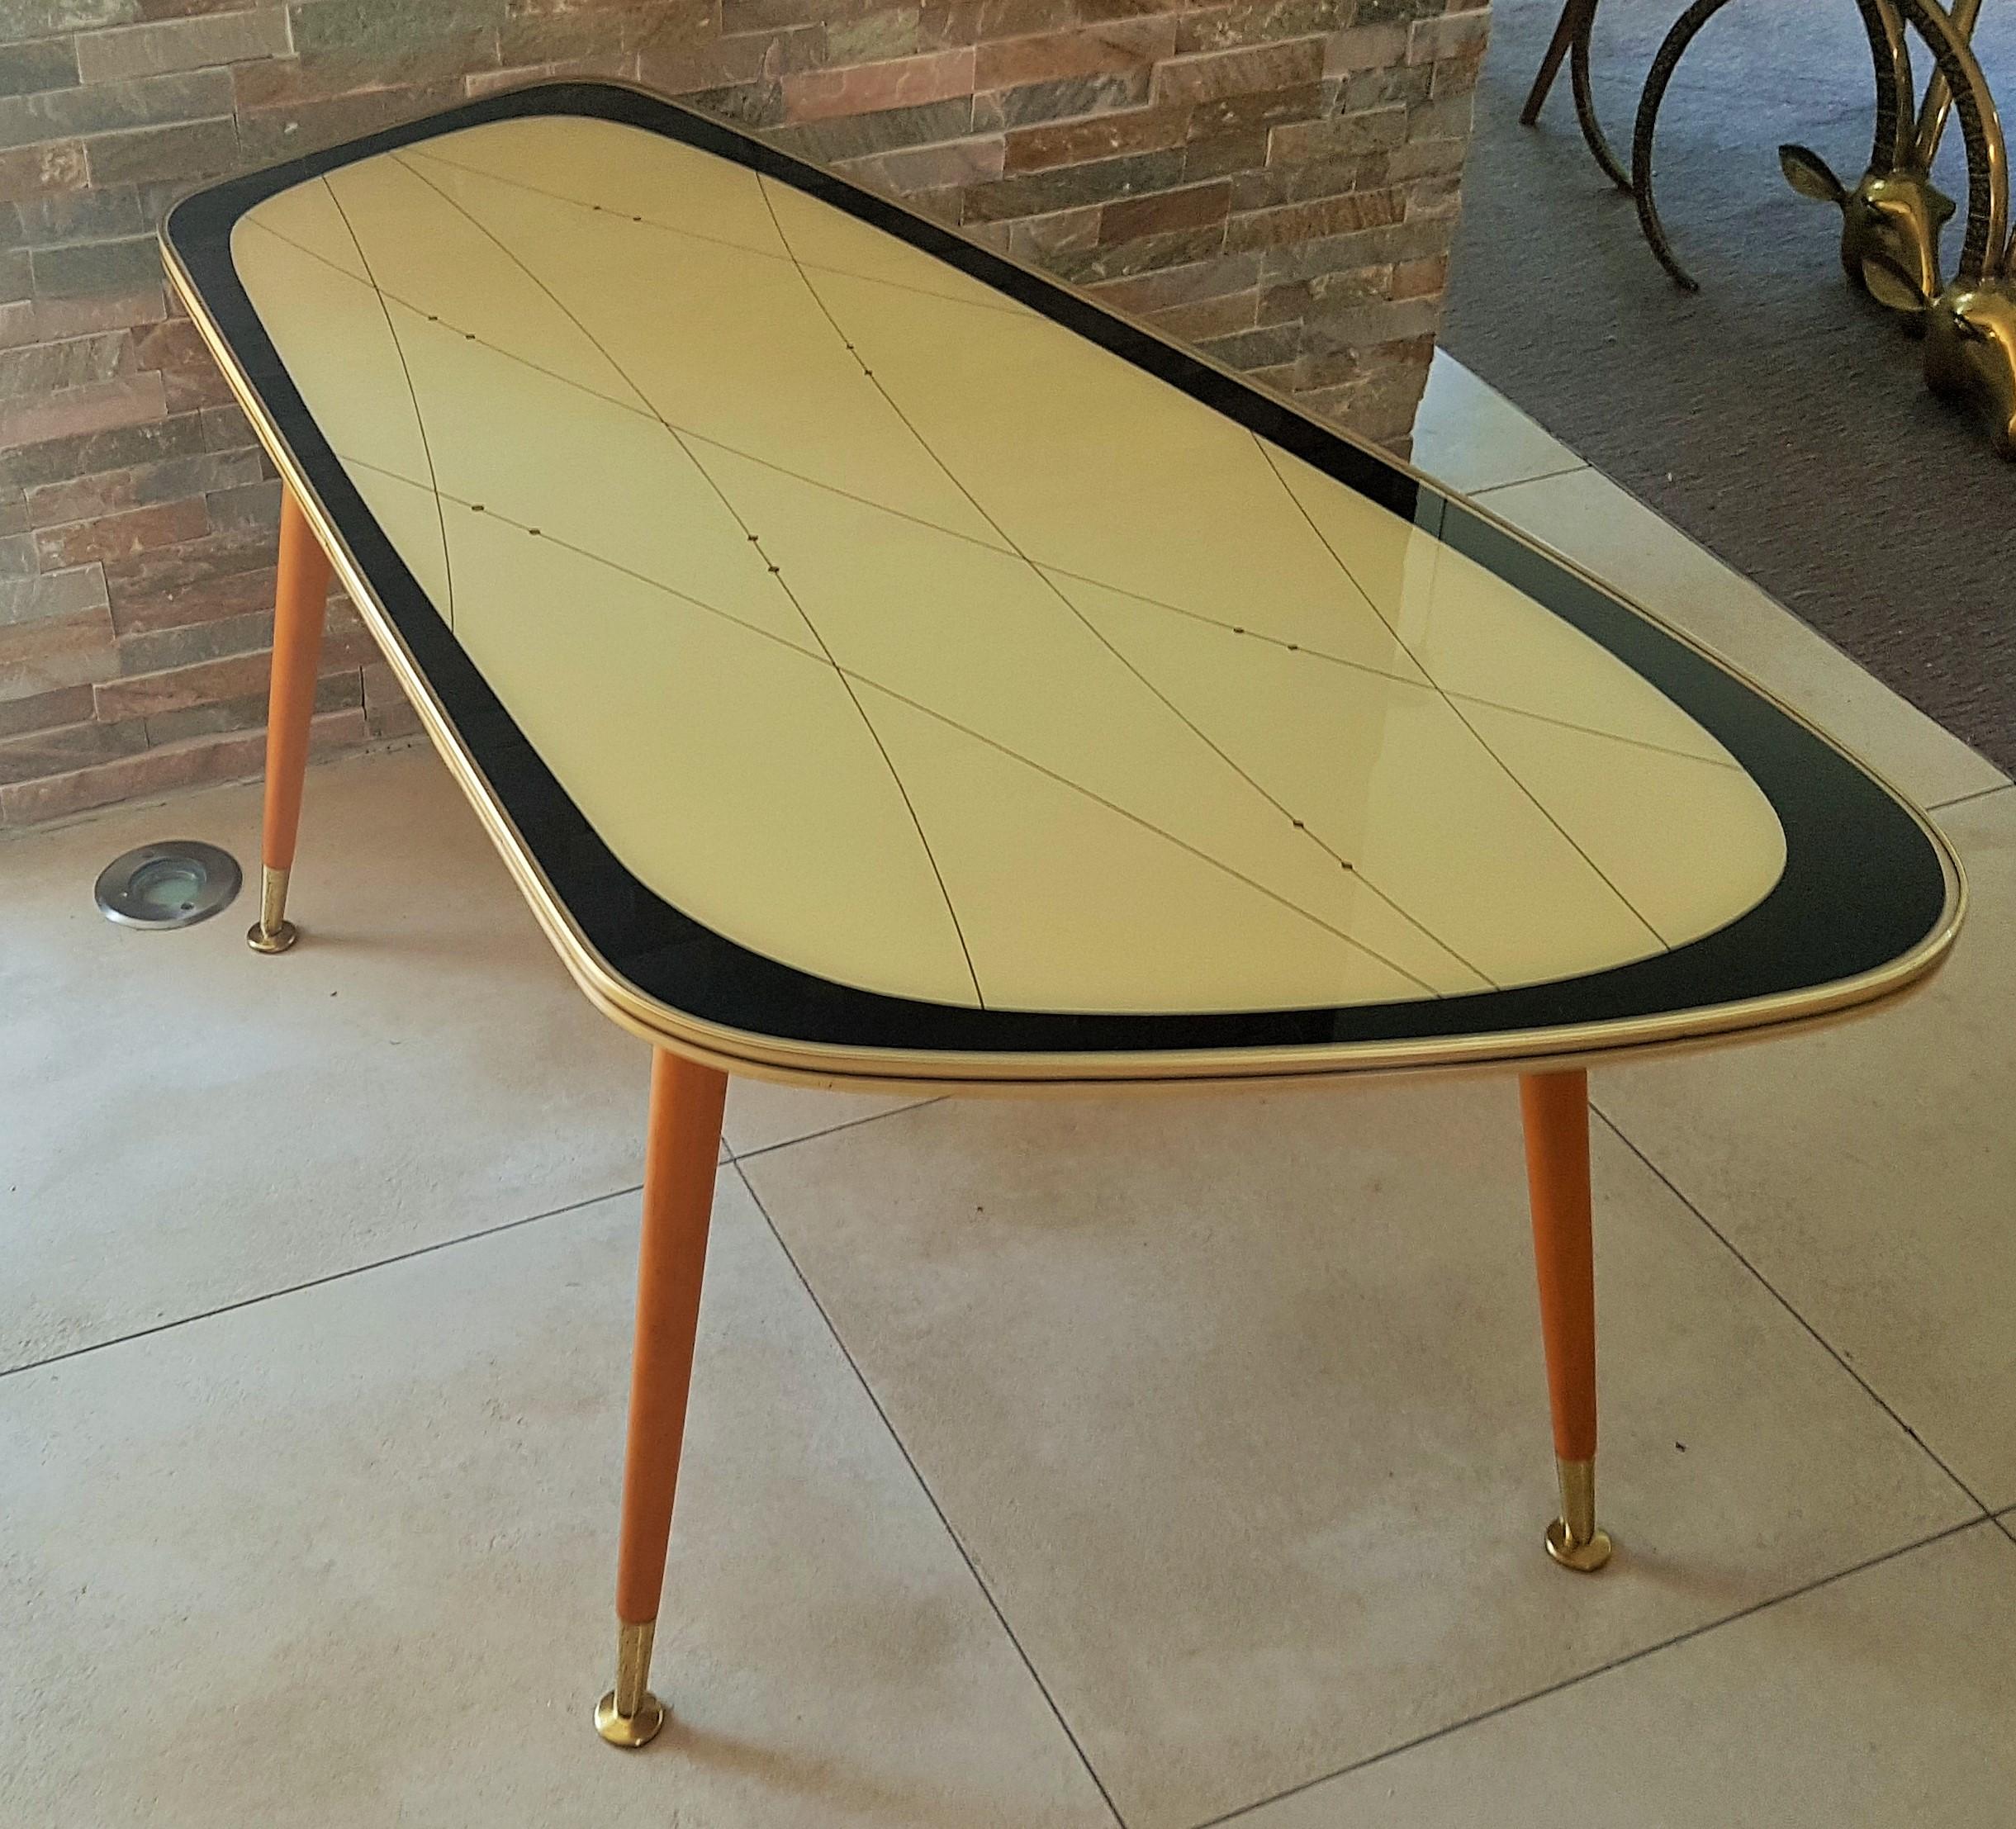 Midcentury side coffee table, Germany 1950s. Black gold Ivory laquer under glass. UFO legs with brass feet.
Very good vintage condition.

    